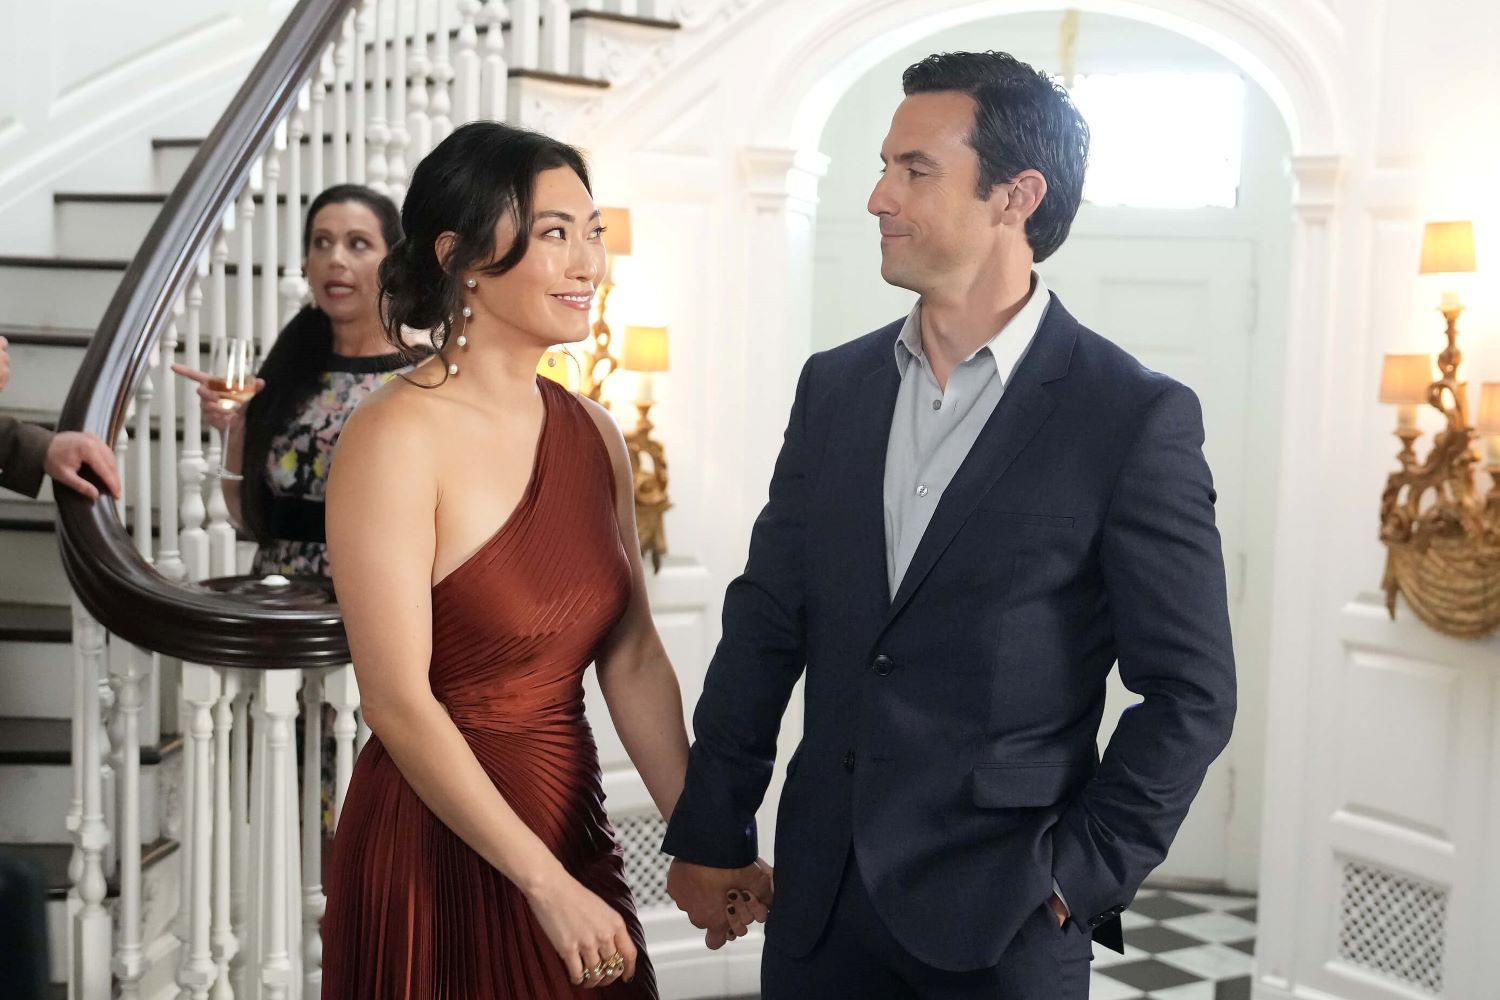 Catherine Haena Kim as Emma Hill and Milo Ventimiglia as Charlie Nicoletti in 'The Company You Keep' Season 1 Episode 4, 'All In.' Emma wears a reddish brown one-shoulder dress. Charlie wears a dark blue suit over a light gray button-up shirt.